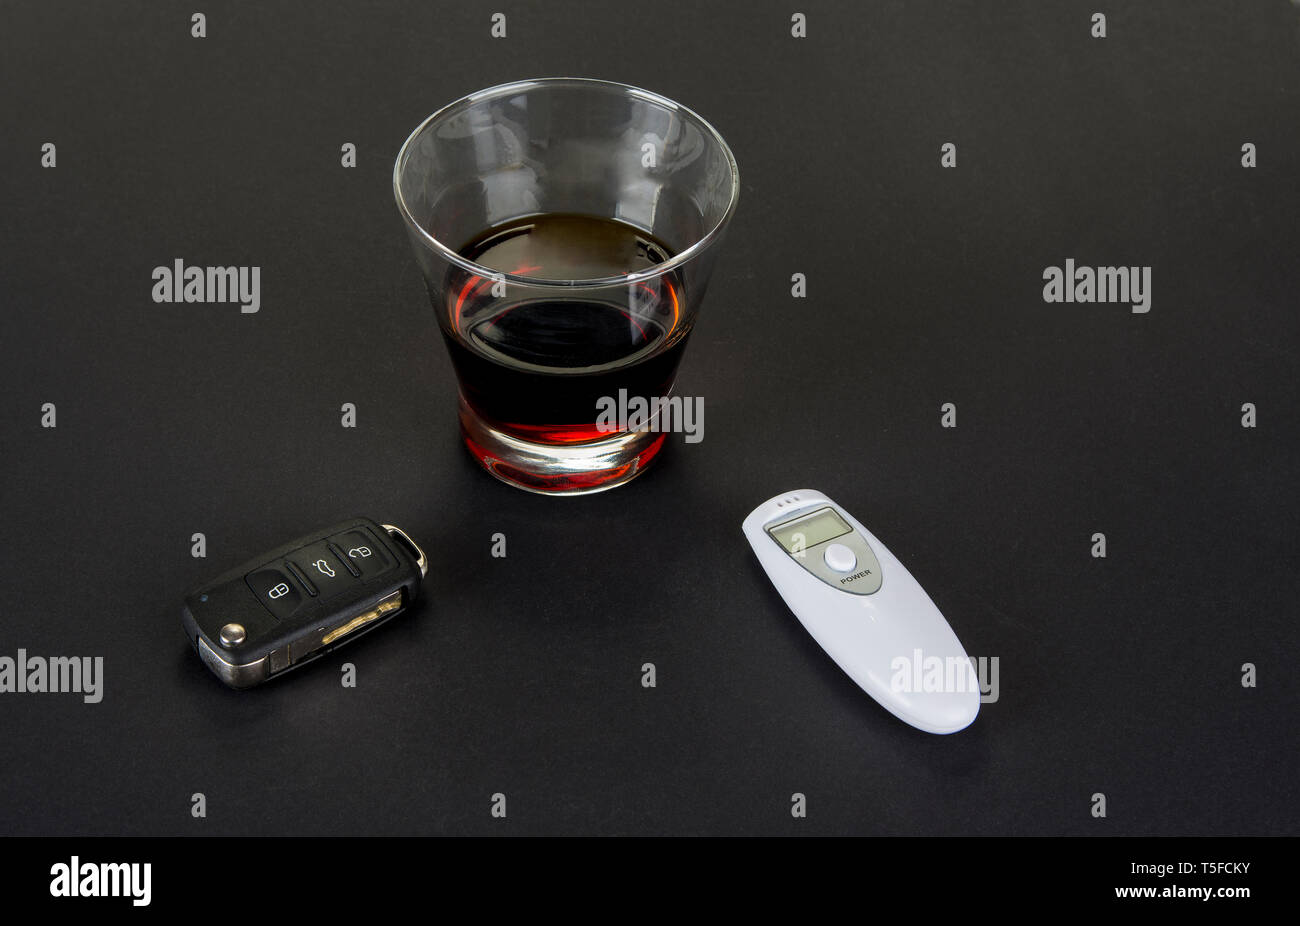 Check alcohol level before you drive. Don't drink and drive concept Stock Photo